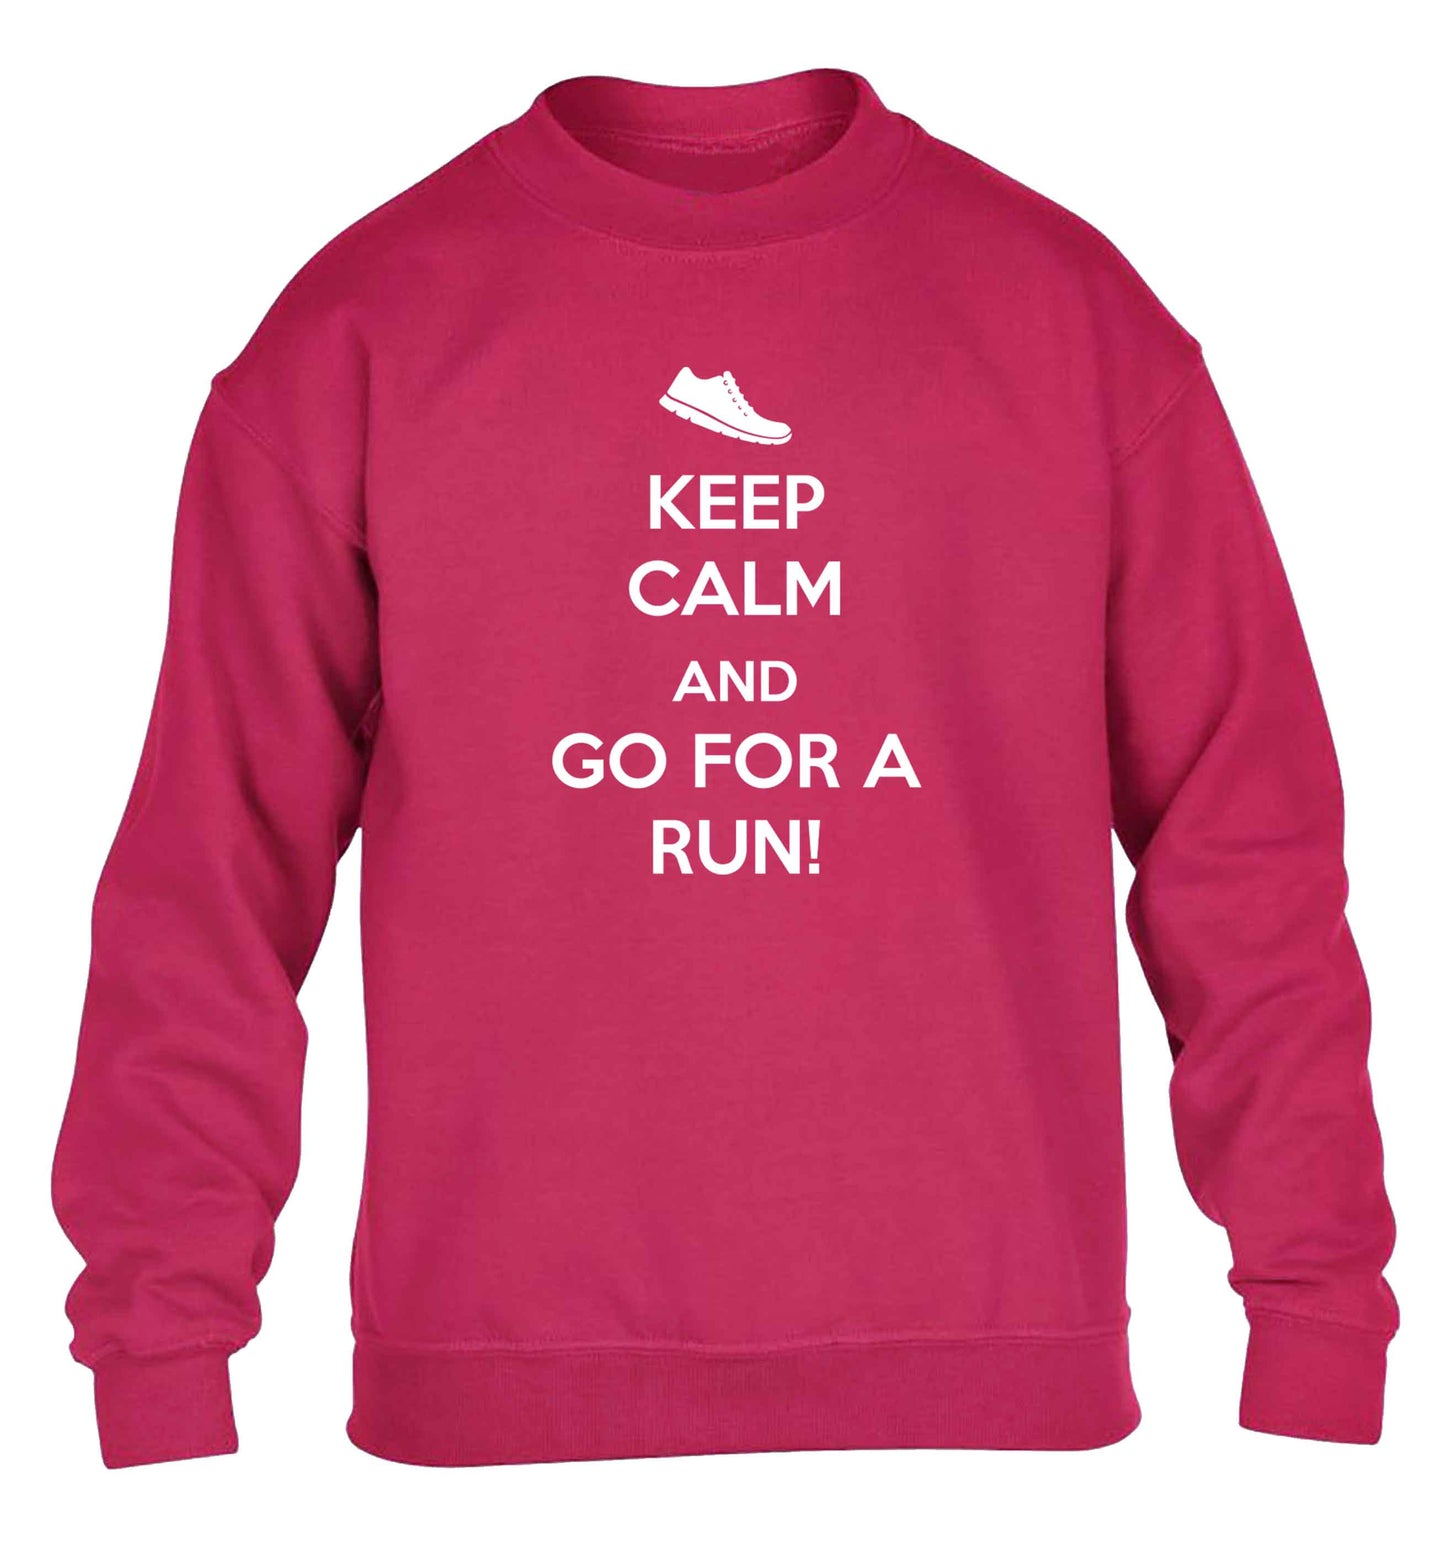 Keep calm and go for a run children's pink sweater 12-13 Years